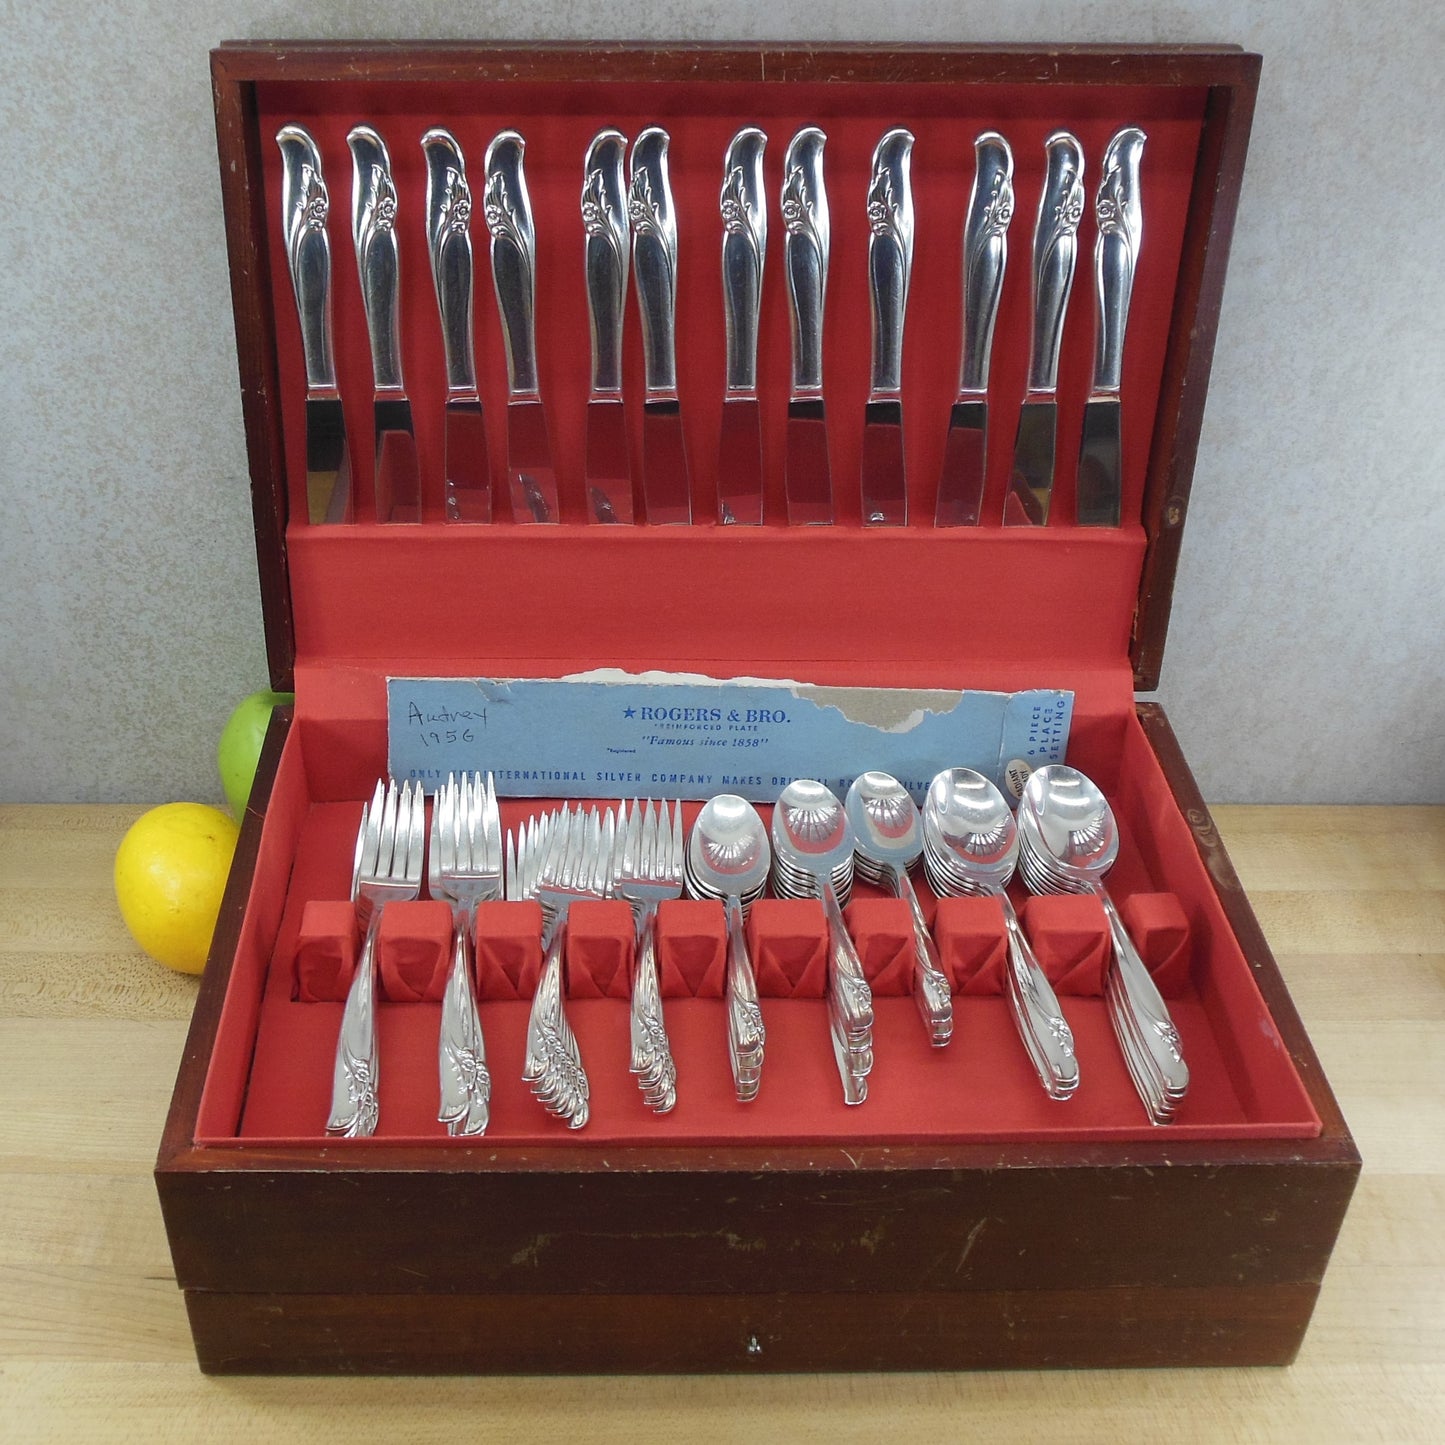 Rogers & Bros. 1957 Exquisite Radiant Lady Silverplate Silverware Set - Service for 12